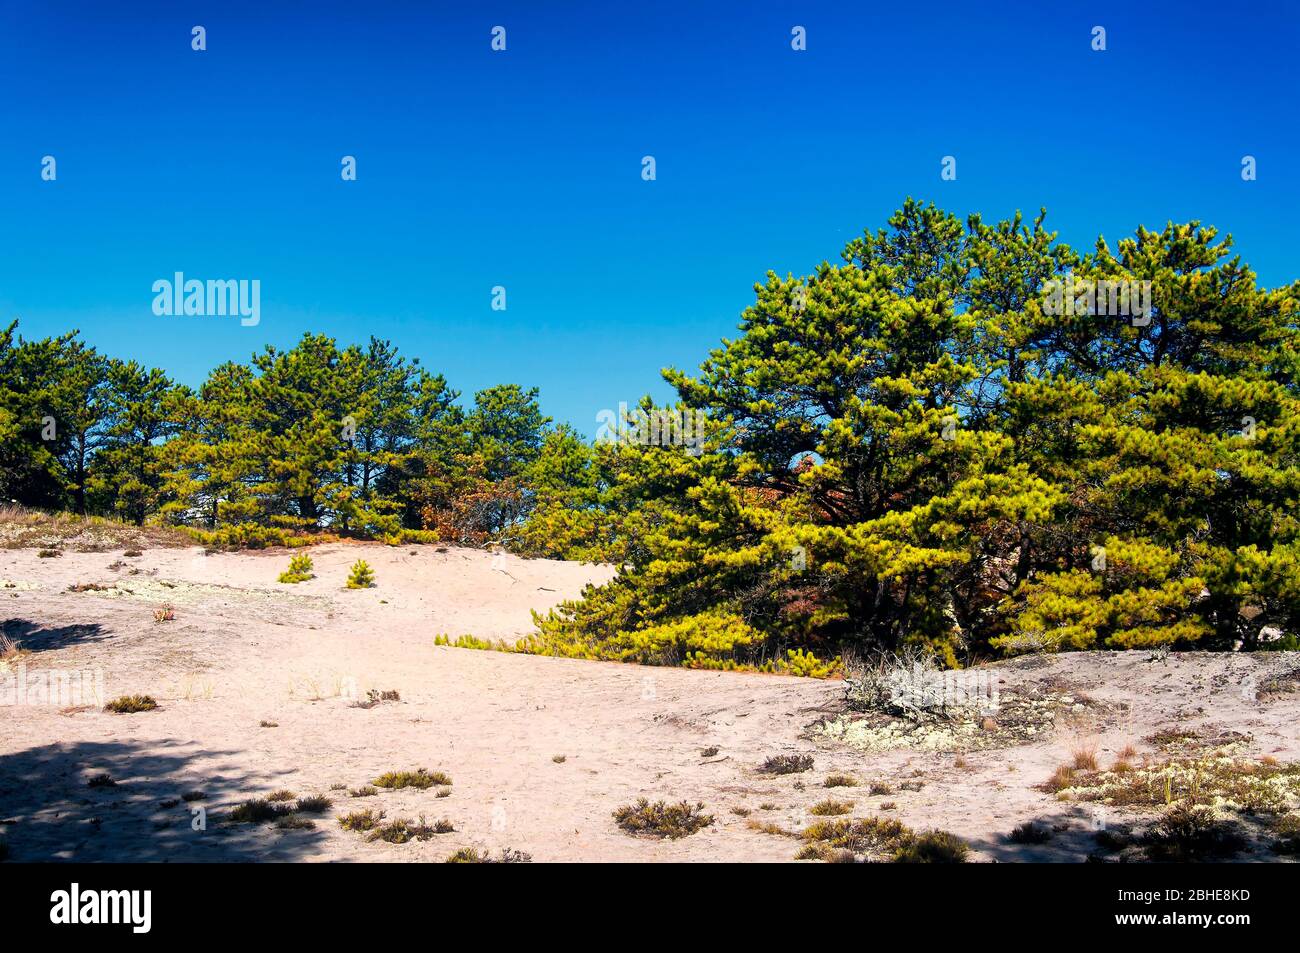 The national seashore located in Cape Cod Massachusetts on a sunny blue sky autumn day in New england. Stock Photo